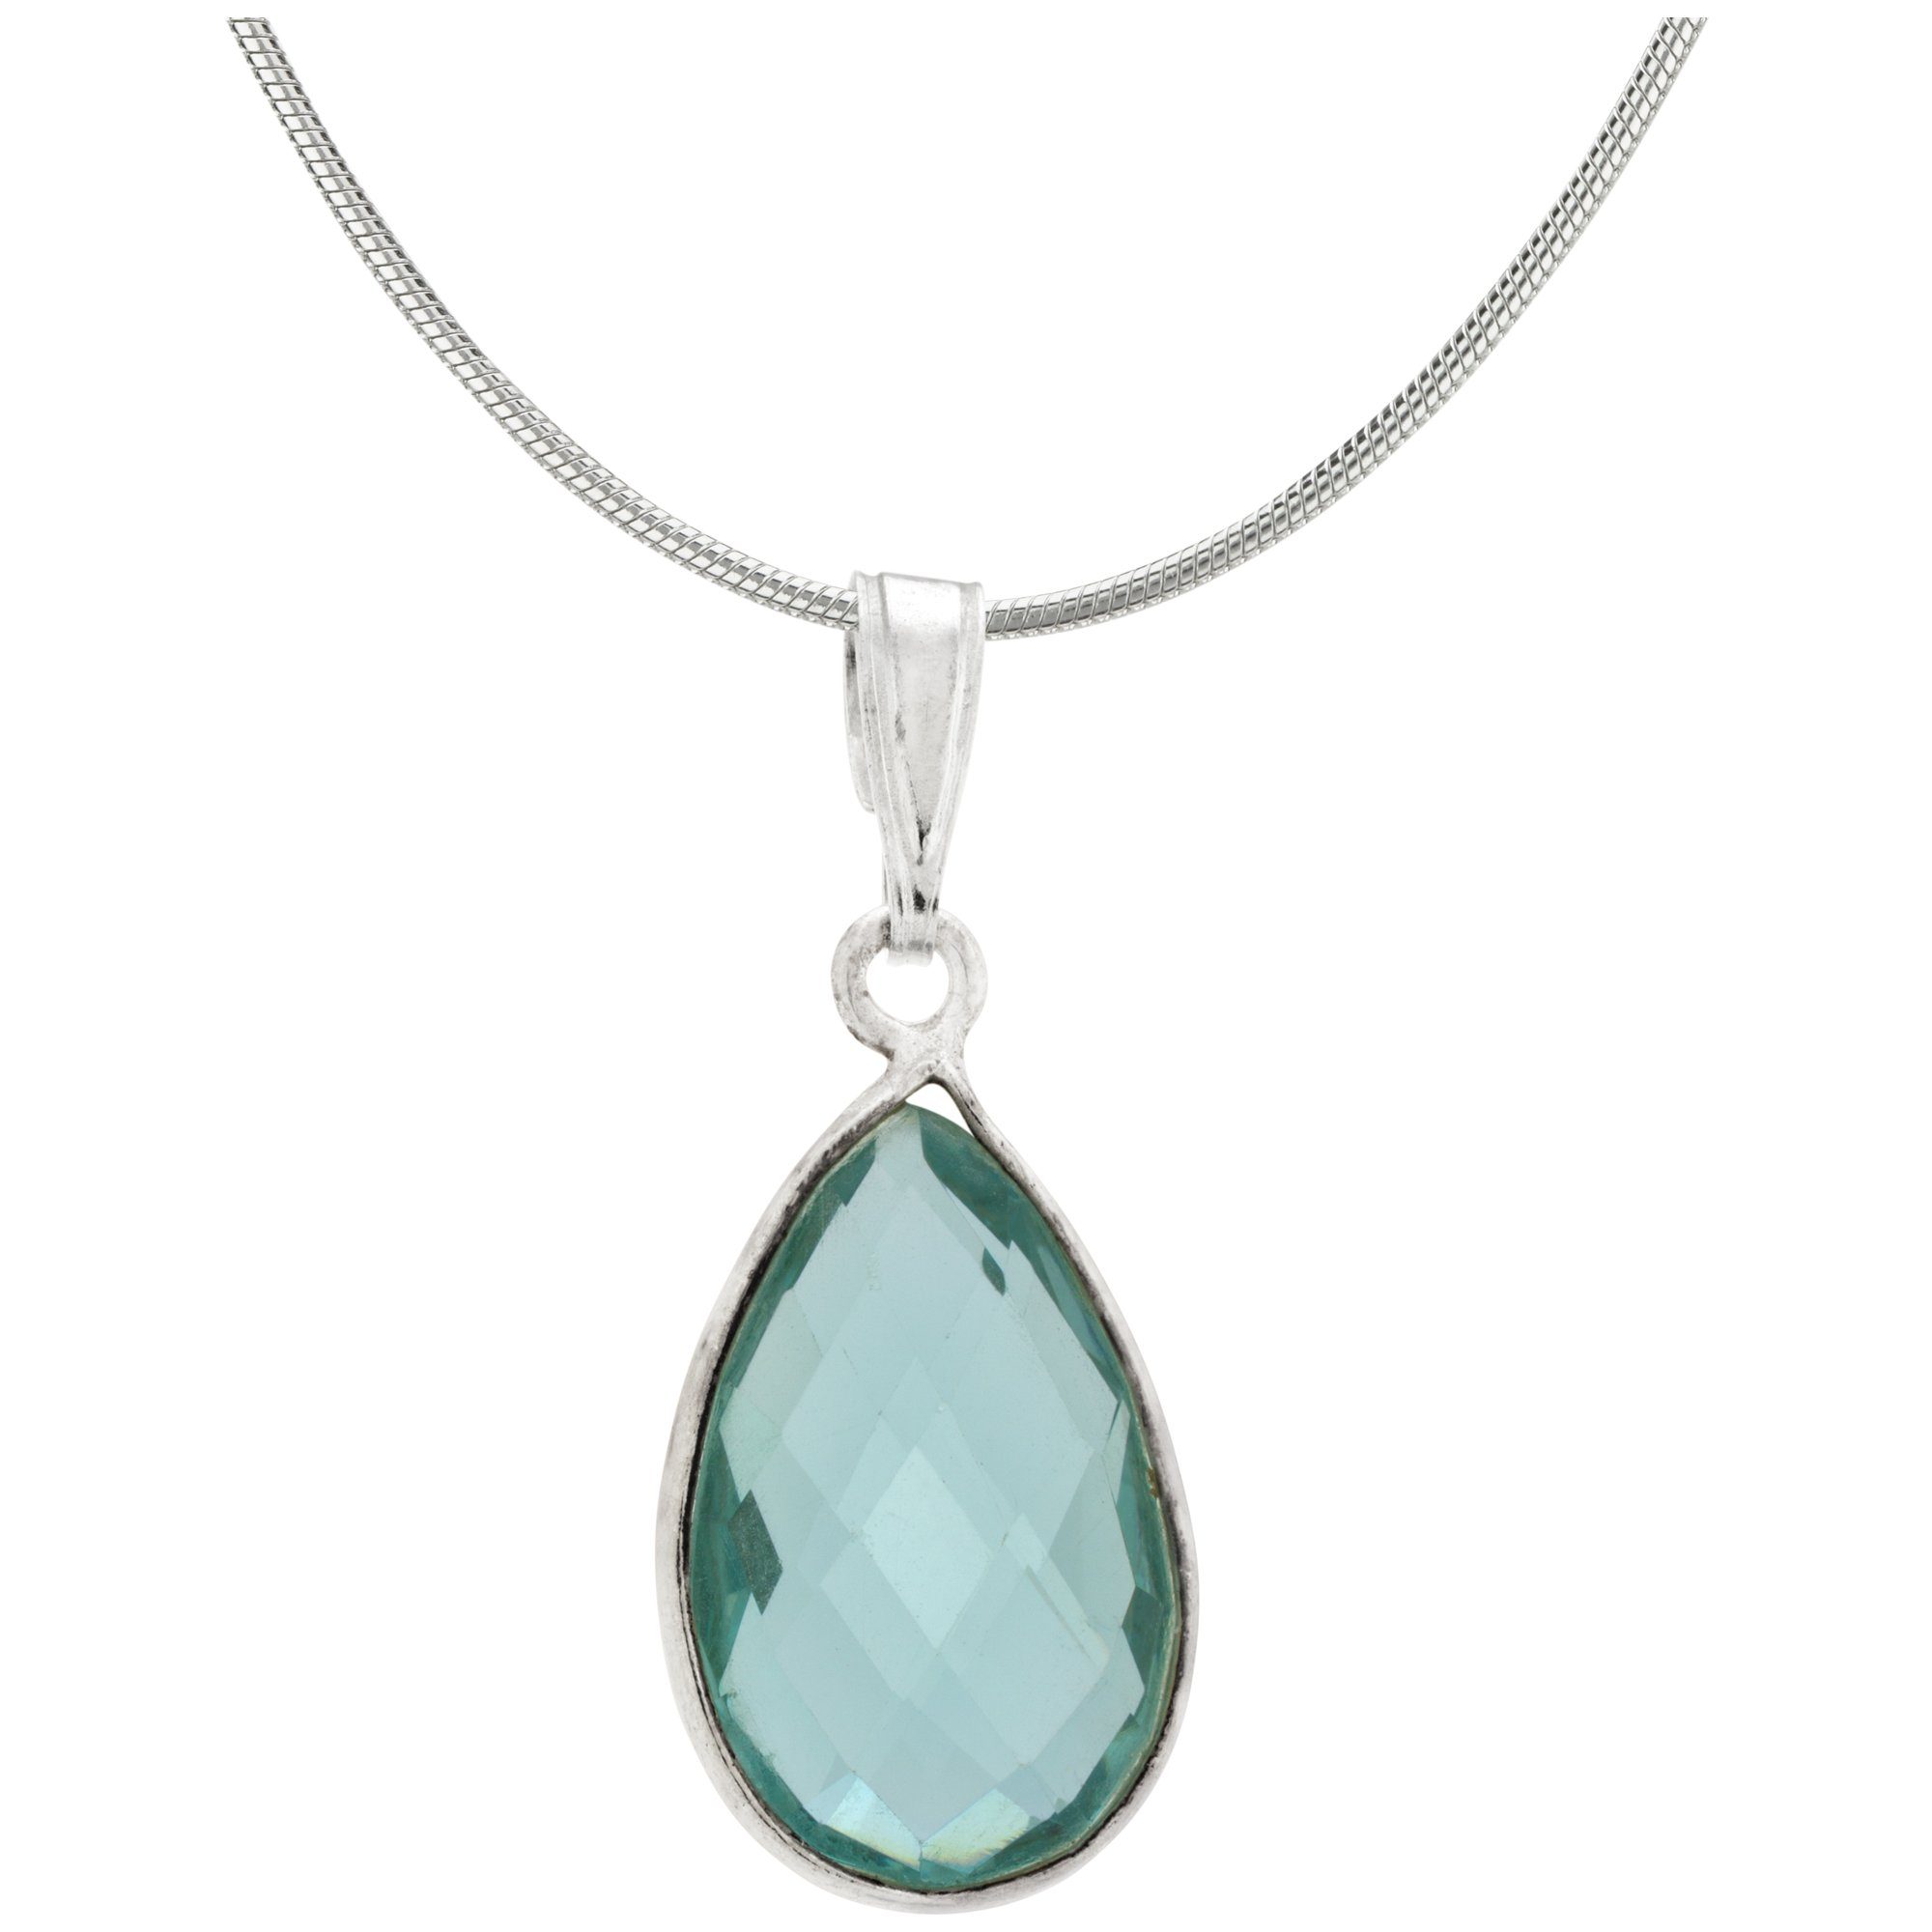 Faceted Quartz & Sterling Necklace - Aqua - With Sterling Cable Chain